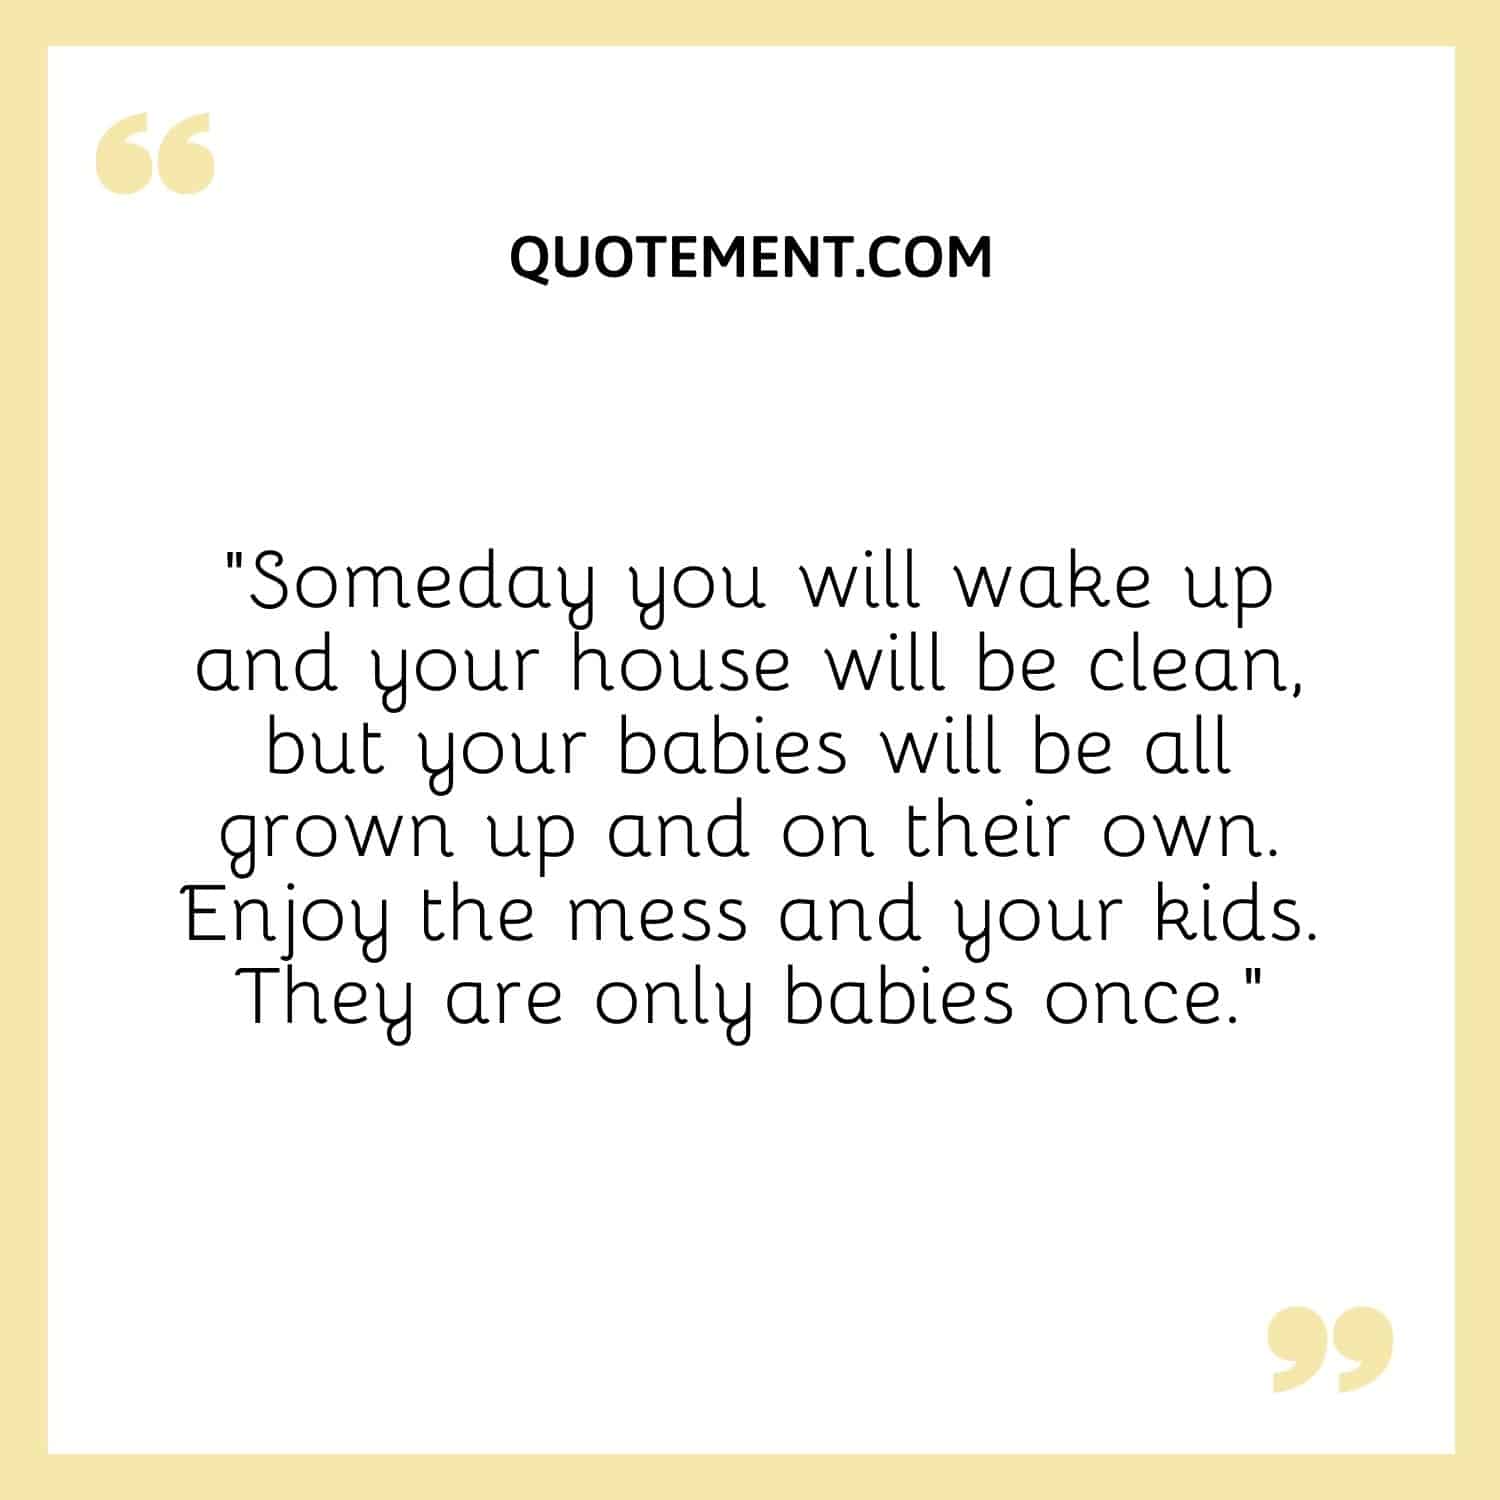 Someday you will wake up and your house will be clean, but your babies will be all grown up and on their own